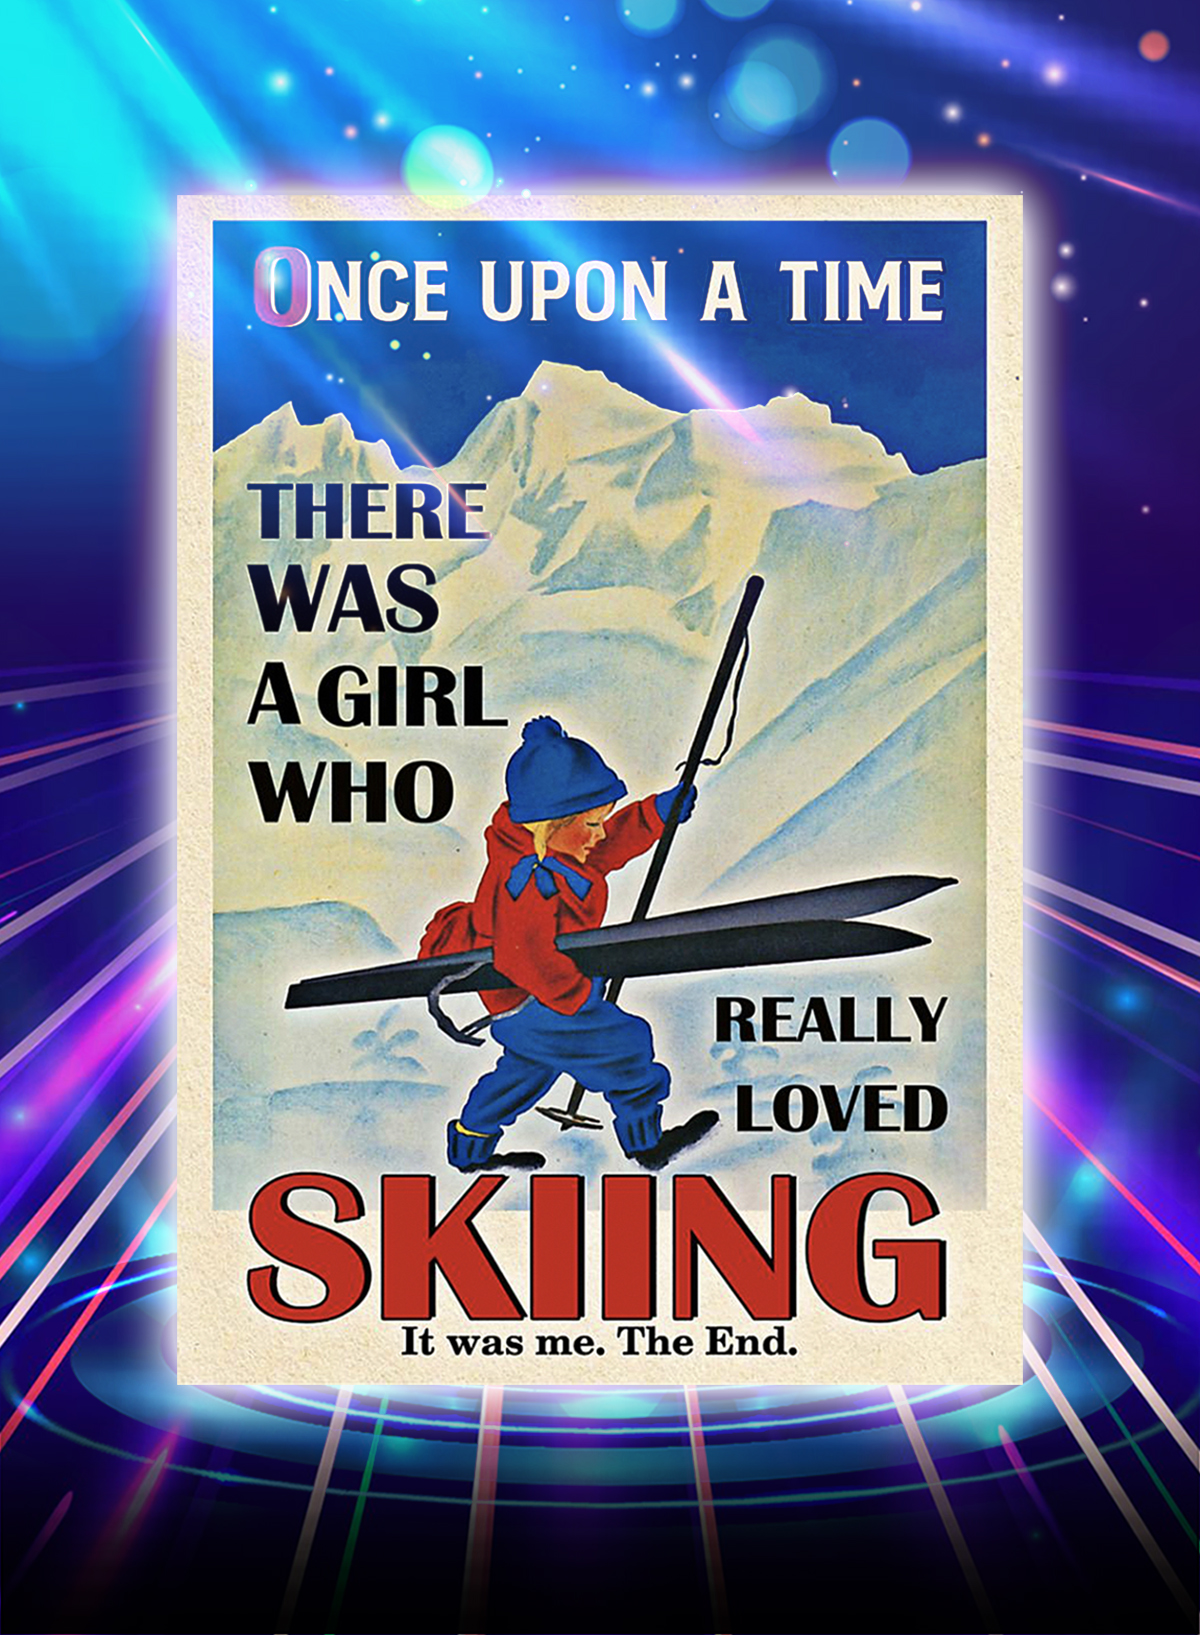 Once upon a time there was a girl who really loved skiing poster - A1